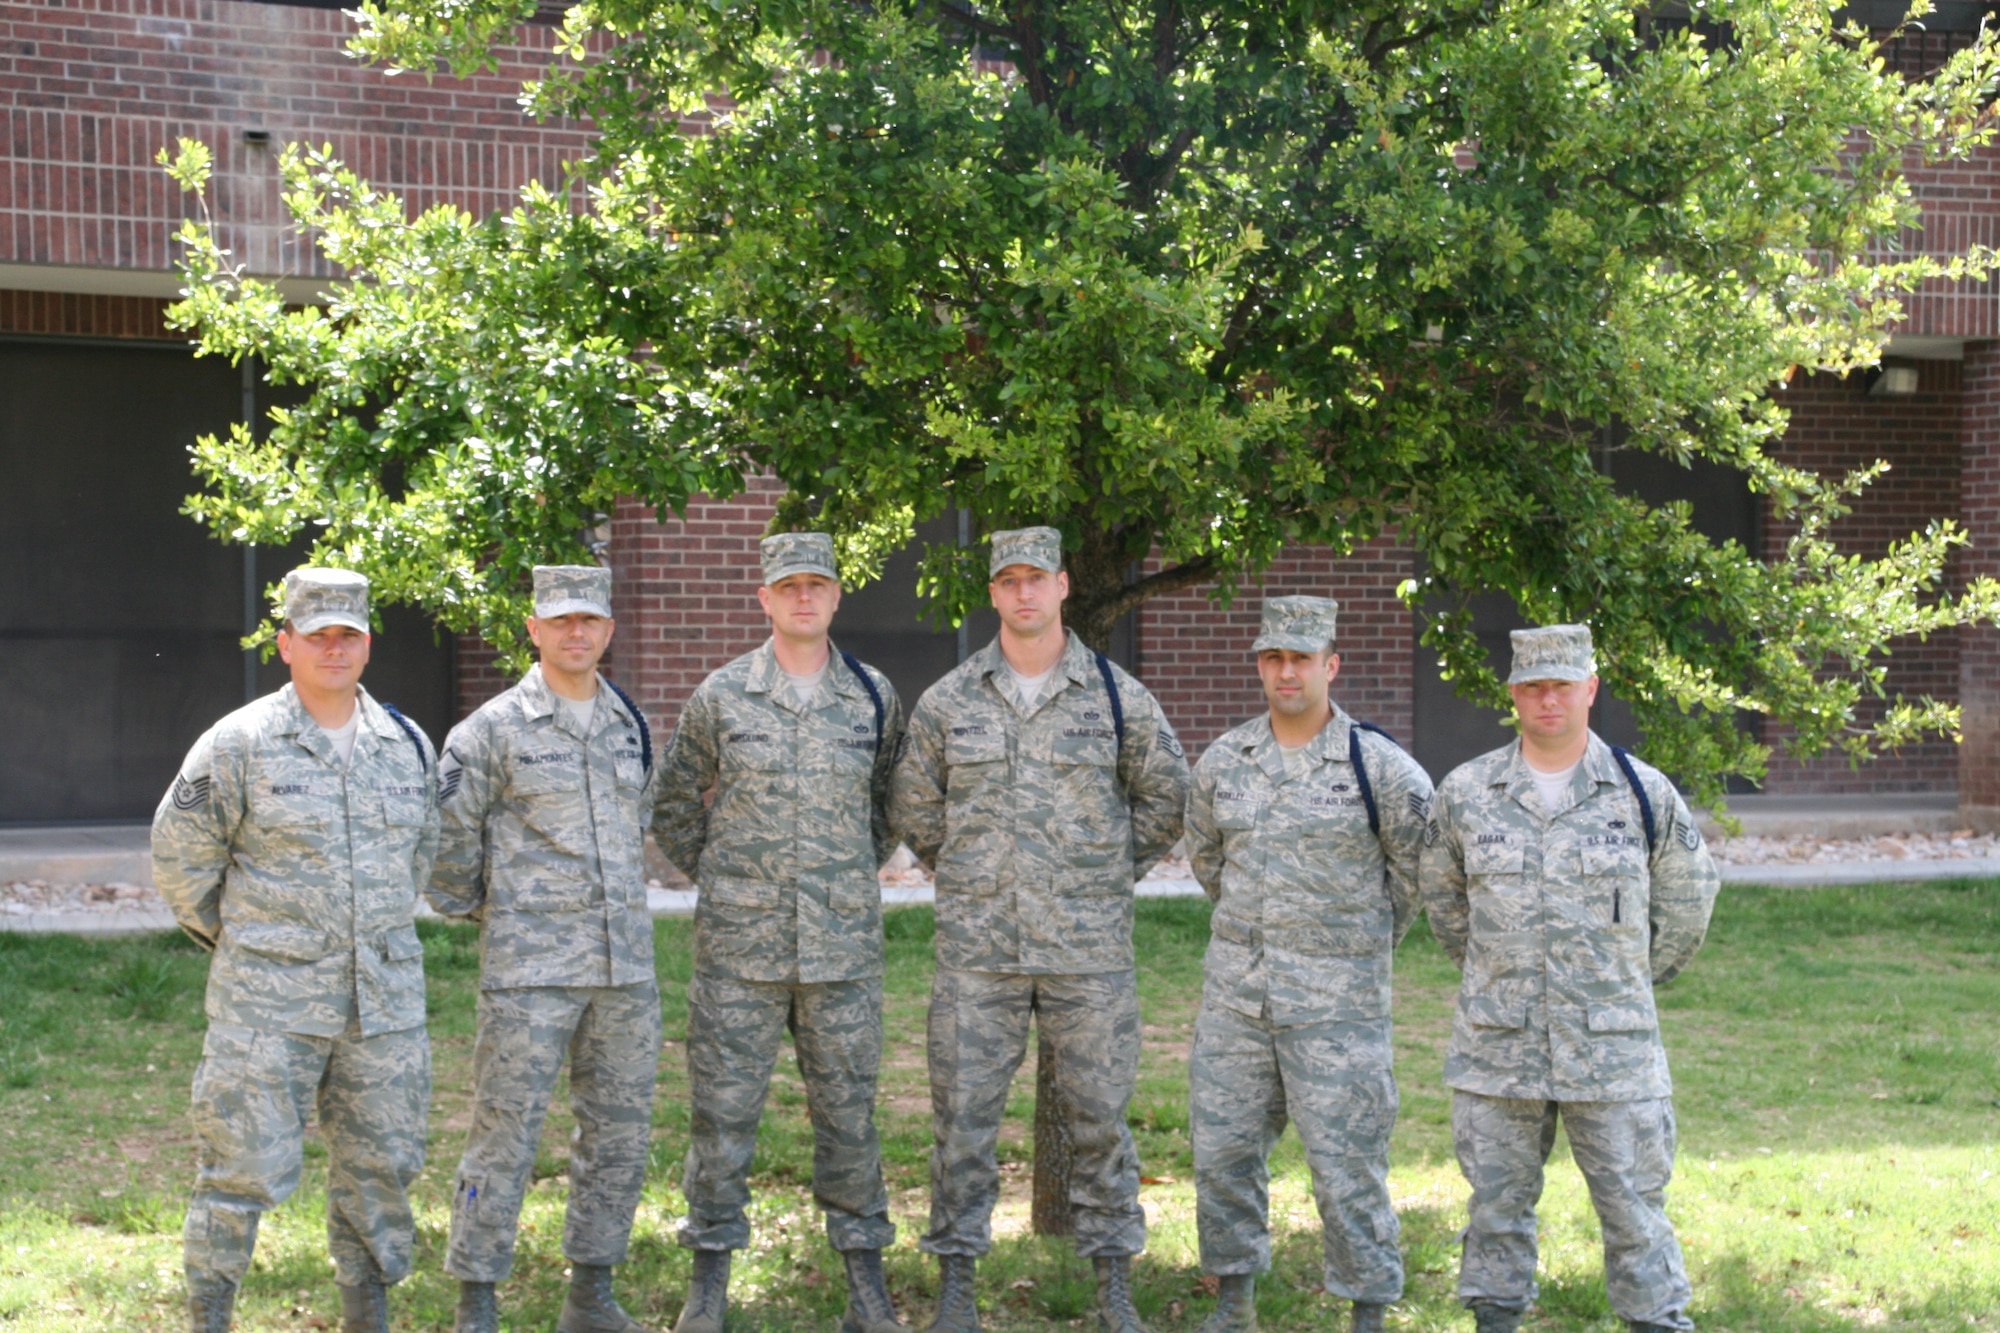 Military Training Leaders provide solid groundwork that help our professional Airmen become successful. MTLs from the 17th Training Group are (from left): Tech. Sgt. Eric Alvarez, Master Sgt. Carlos Miramontes, Tech. Sgt. Steven Nordlund, Staff Sgt. Jason Wentzel, Staff Sgt. Michael Berkley and Staff Sgt. Lyle Eagan. (U.S. Air Force photo)